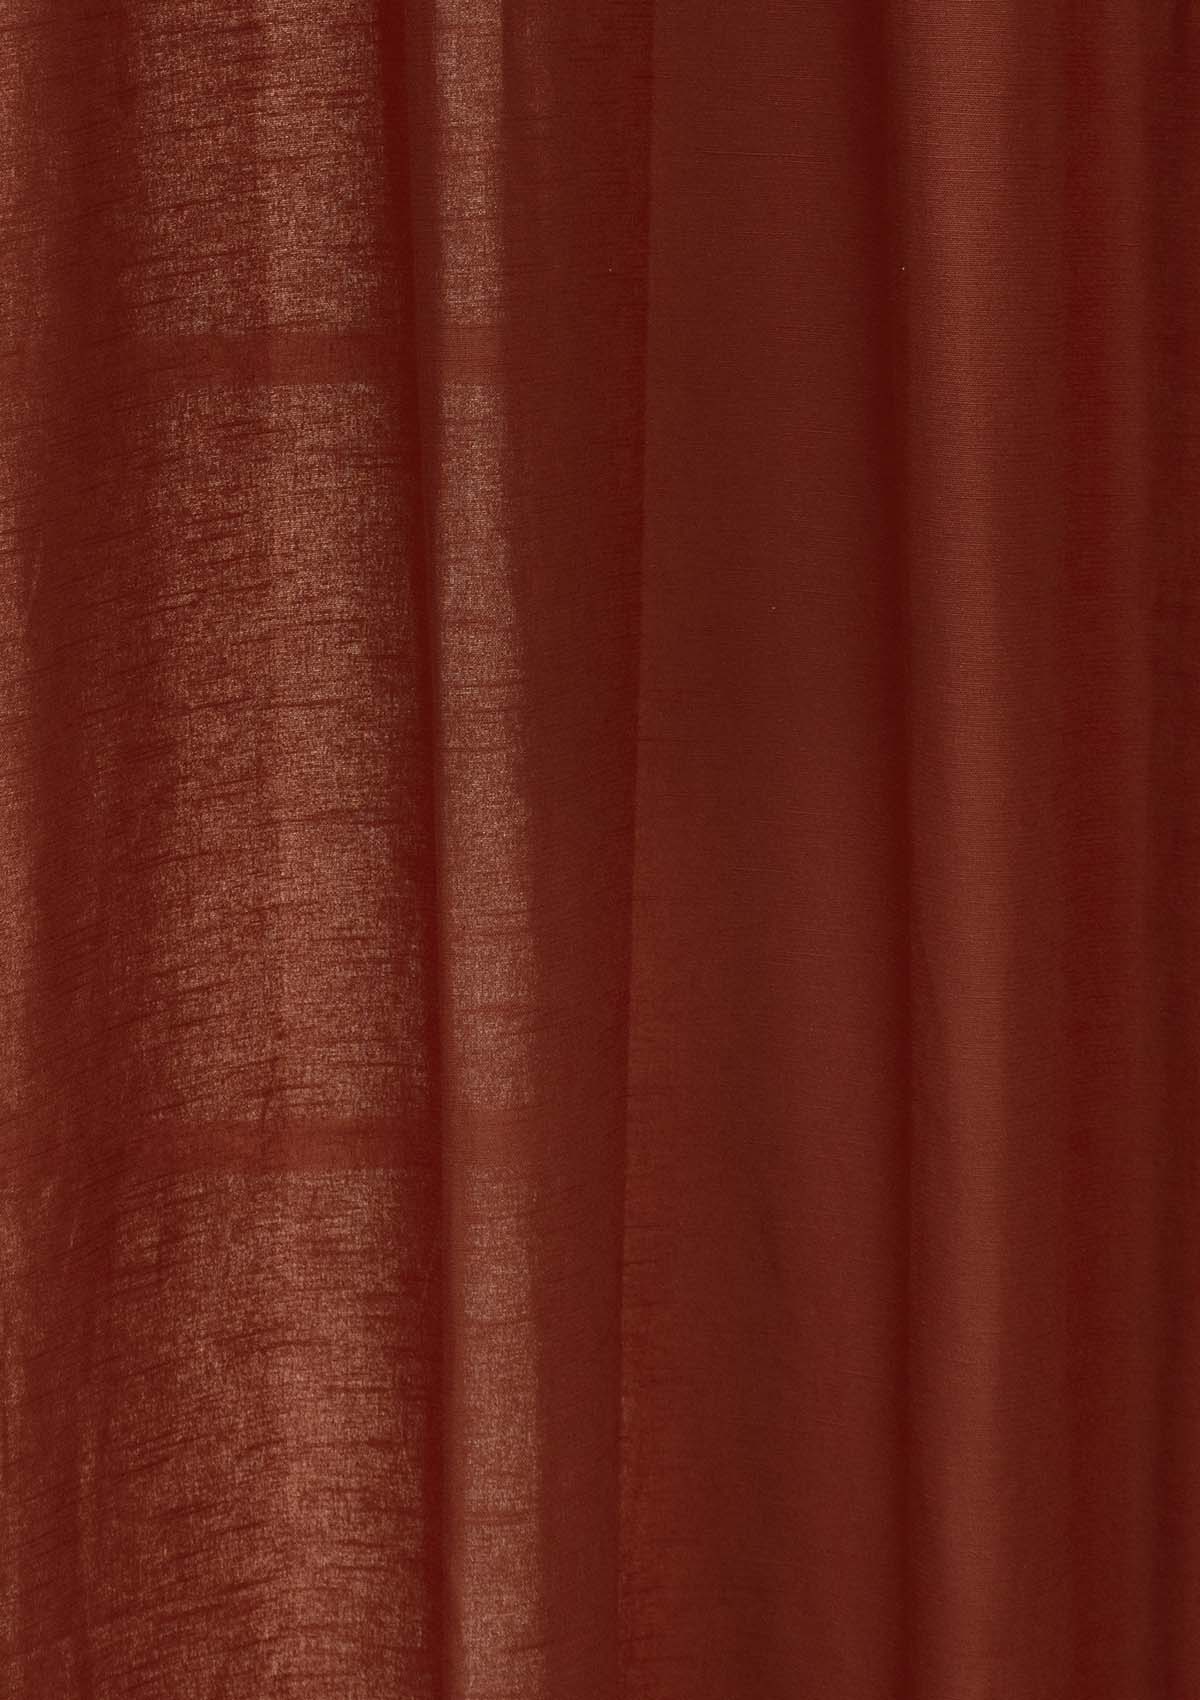 Solid Brick Red 100% Customizable Cotton plain curtain for bedroom - Room darkening